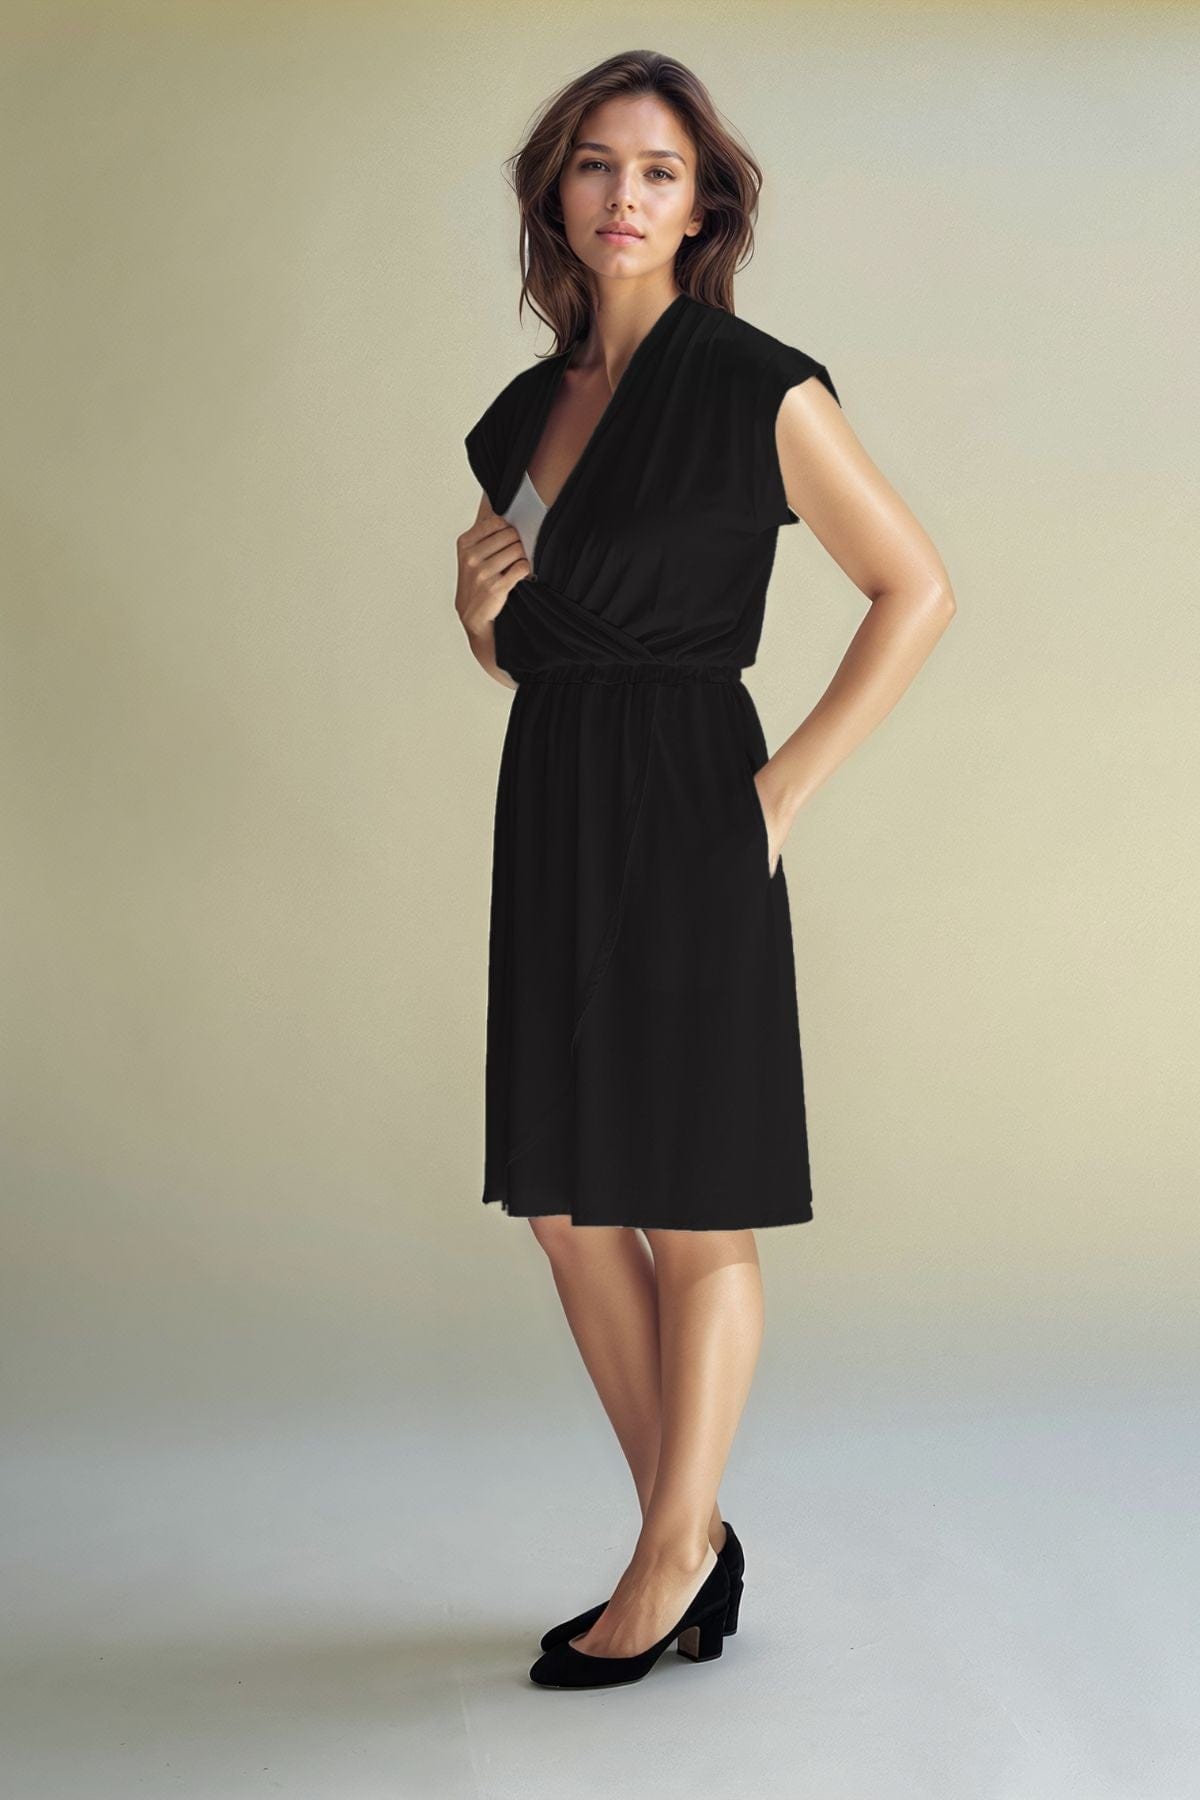 Harper Nursing Dress in midnight front view showing pull aside v-neck detail for breastfeeding access while wearing low heels appropriate for professional workplace